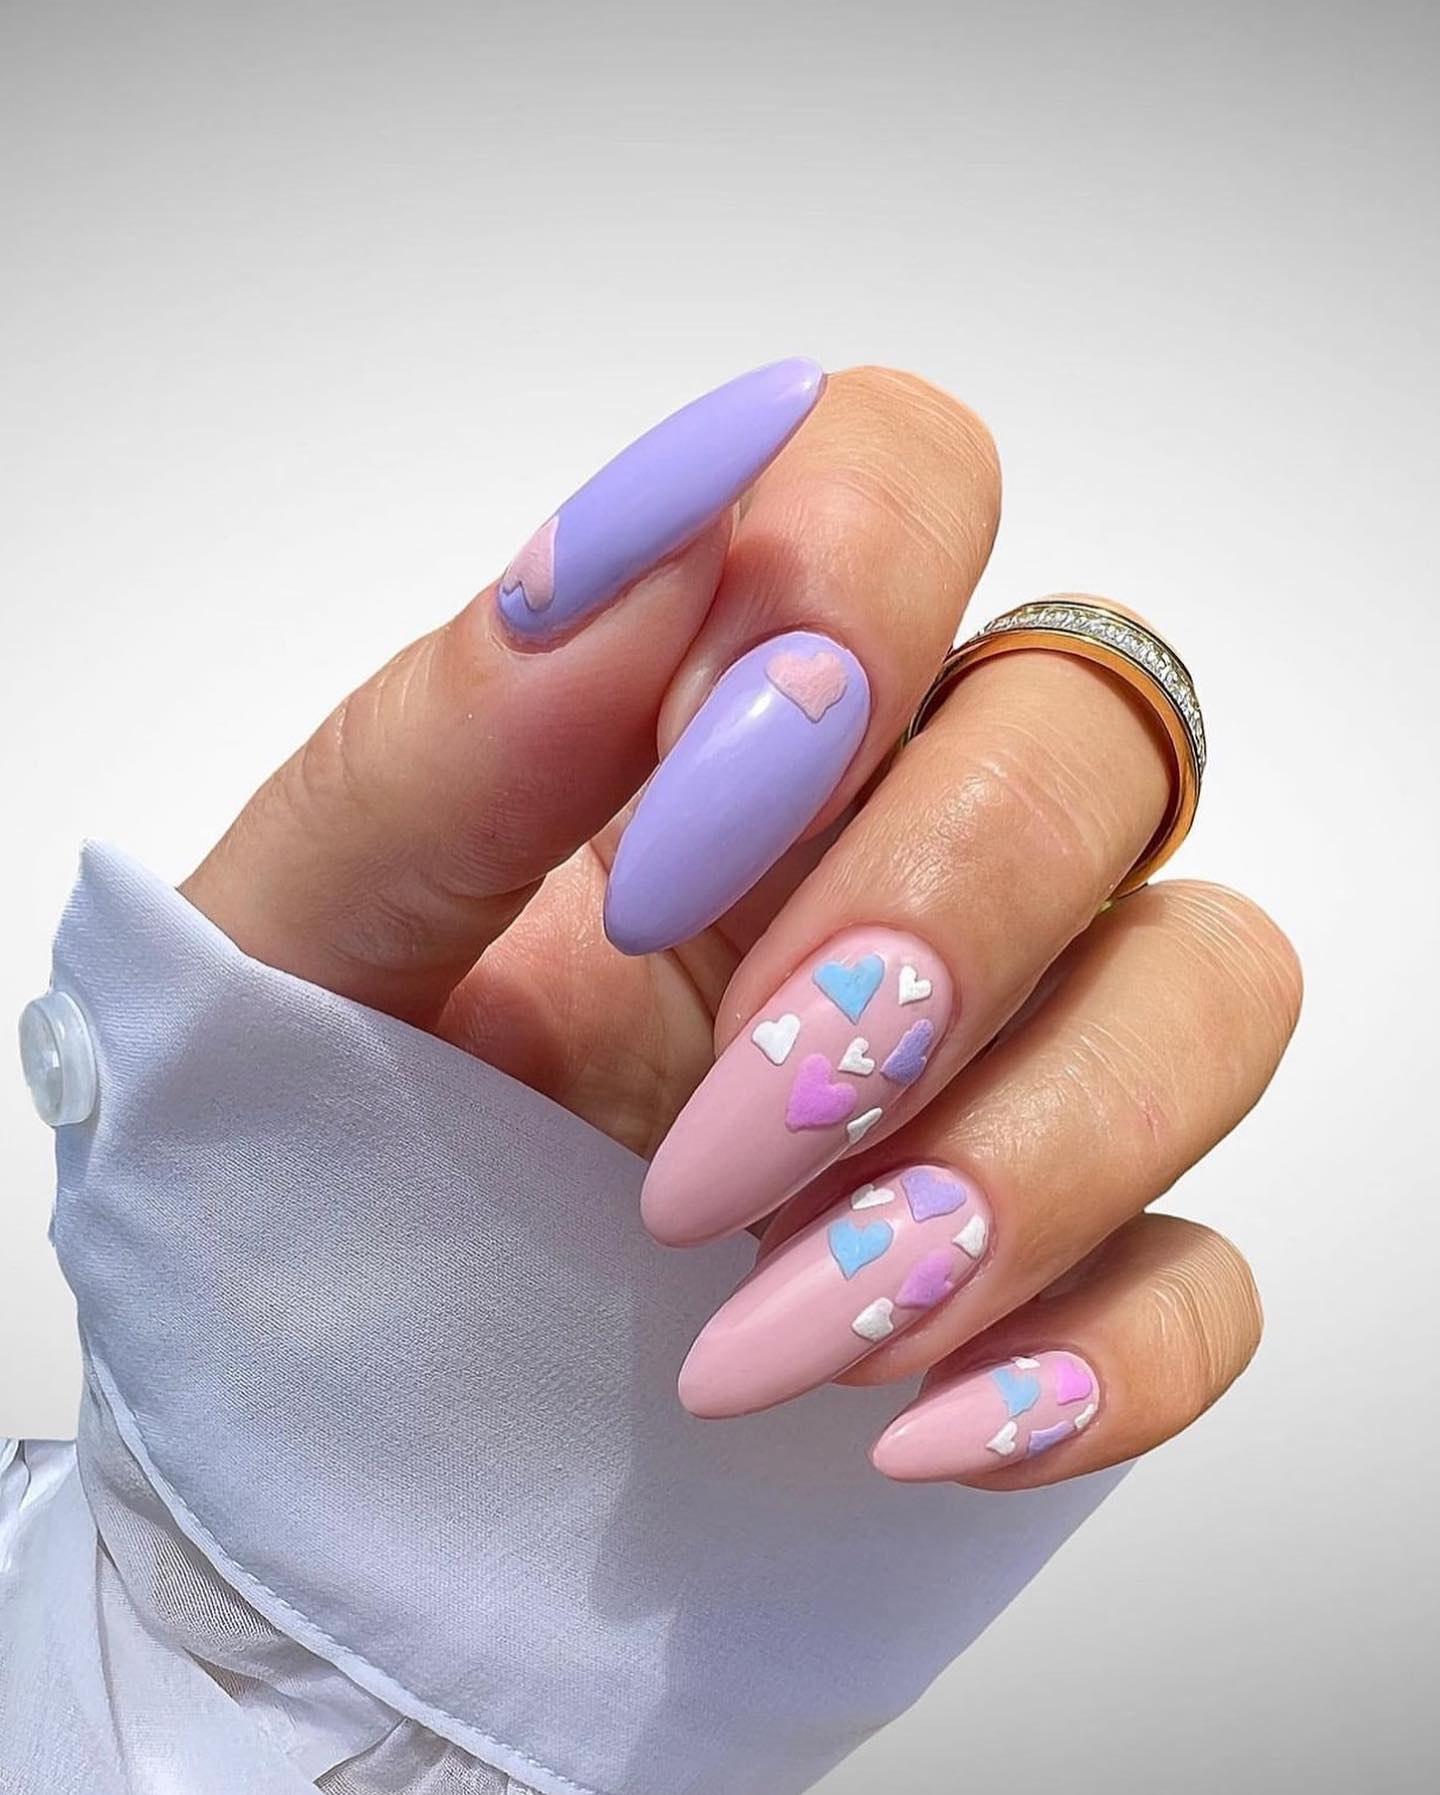 100 Of The Best Spring Inspired Nail Designs images 5